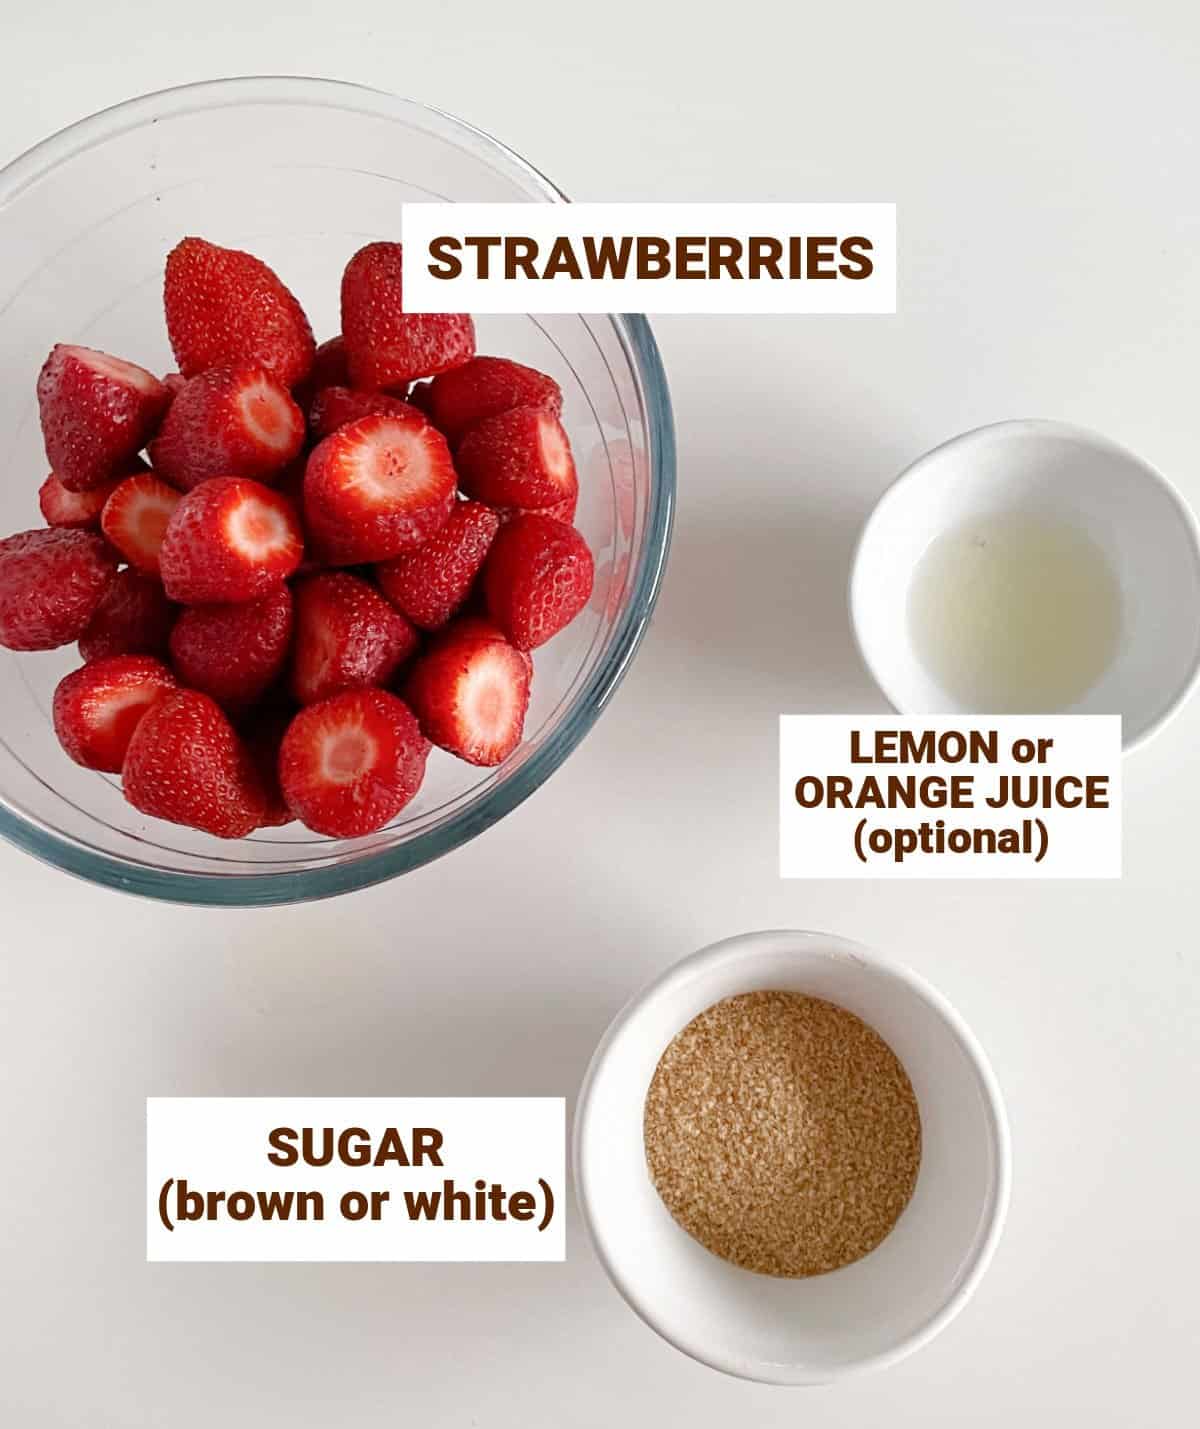 Bowls containing ingredients for strawberry compote on white surface, including lemon juice and brown sugar.